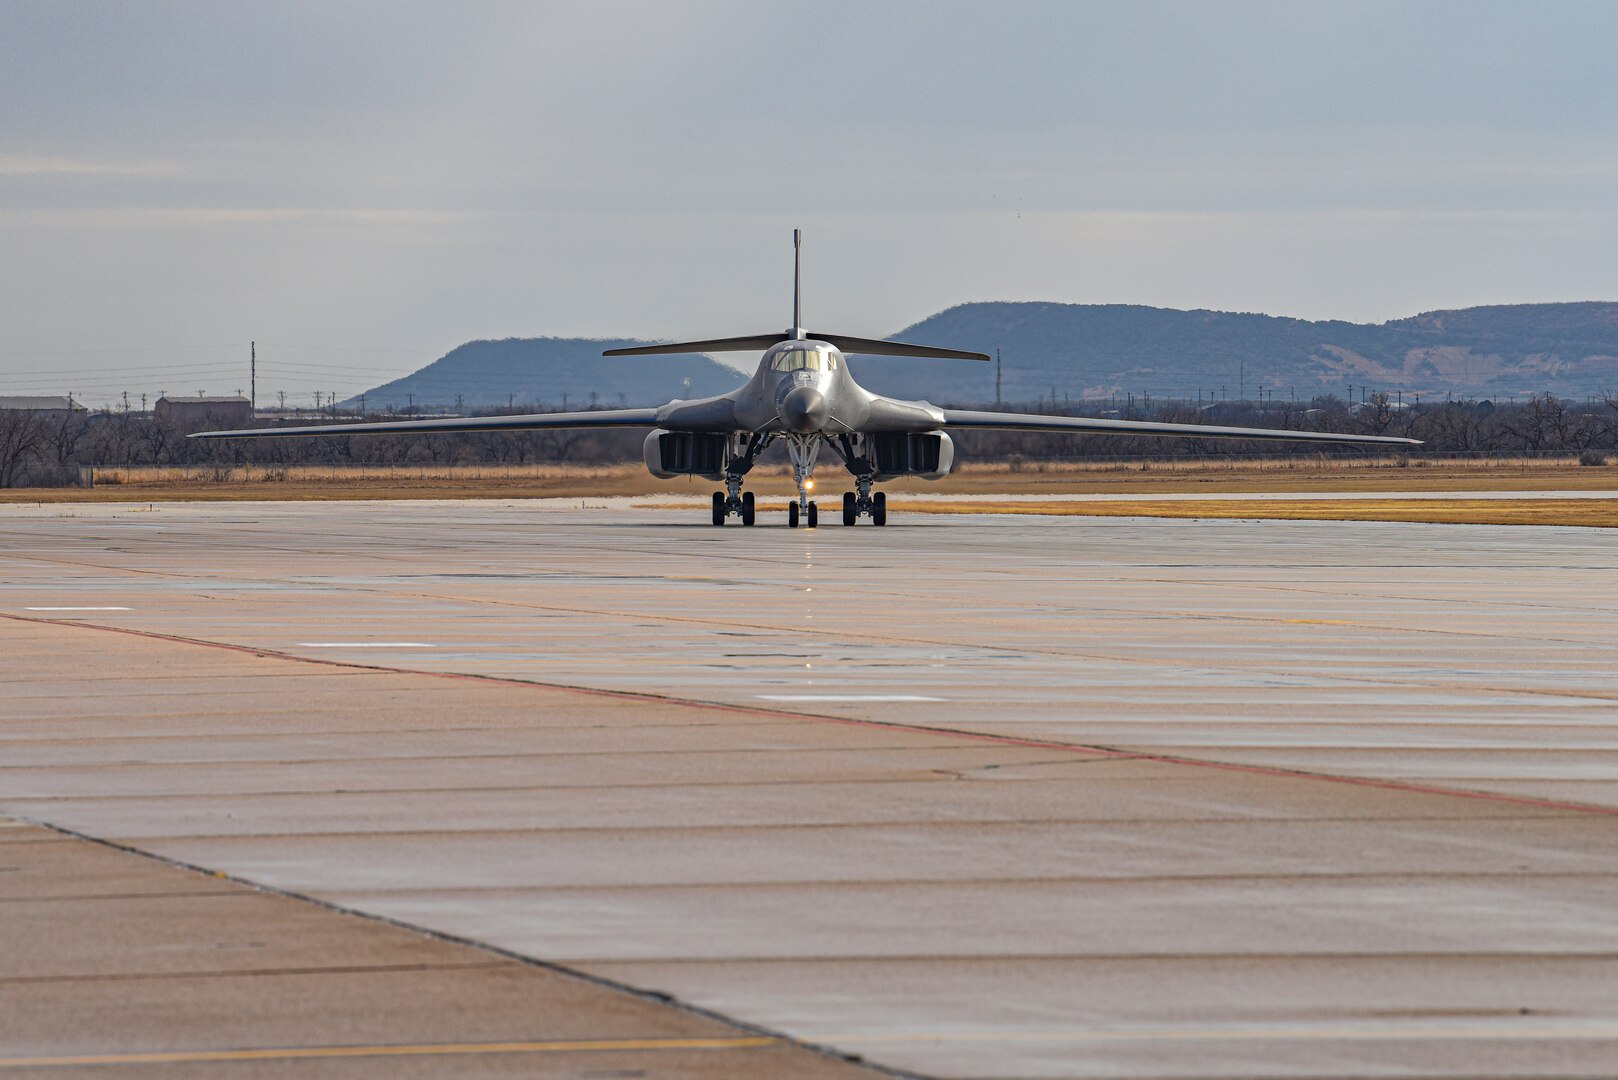 A B-1B Lancer lands after the aircrew completed a Continental United States to Continental United States joint Large Force Exercise alongside the Japanese Air Self-Defense Force at Dyess Air Force Base, Texas, Jan. 11, 2022. This exercise shows that the U.S. Air Force is always there to ensure a free and open Indo-Pacific. (U.S. Air Force photo by Airman 1st Class Ryan Hayman)